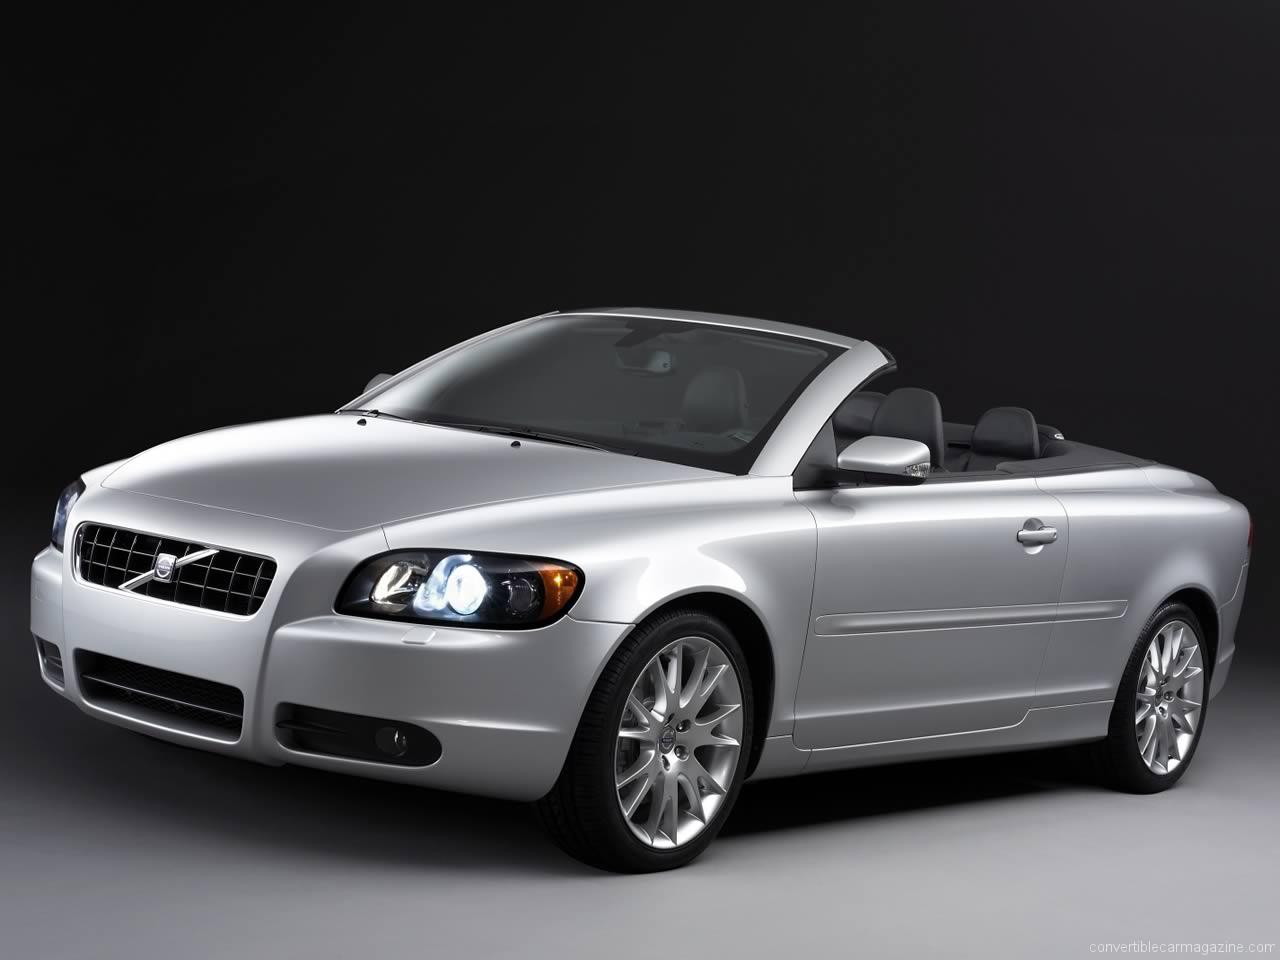 Volvo C70 Convertible Buying Guide